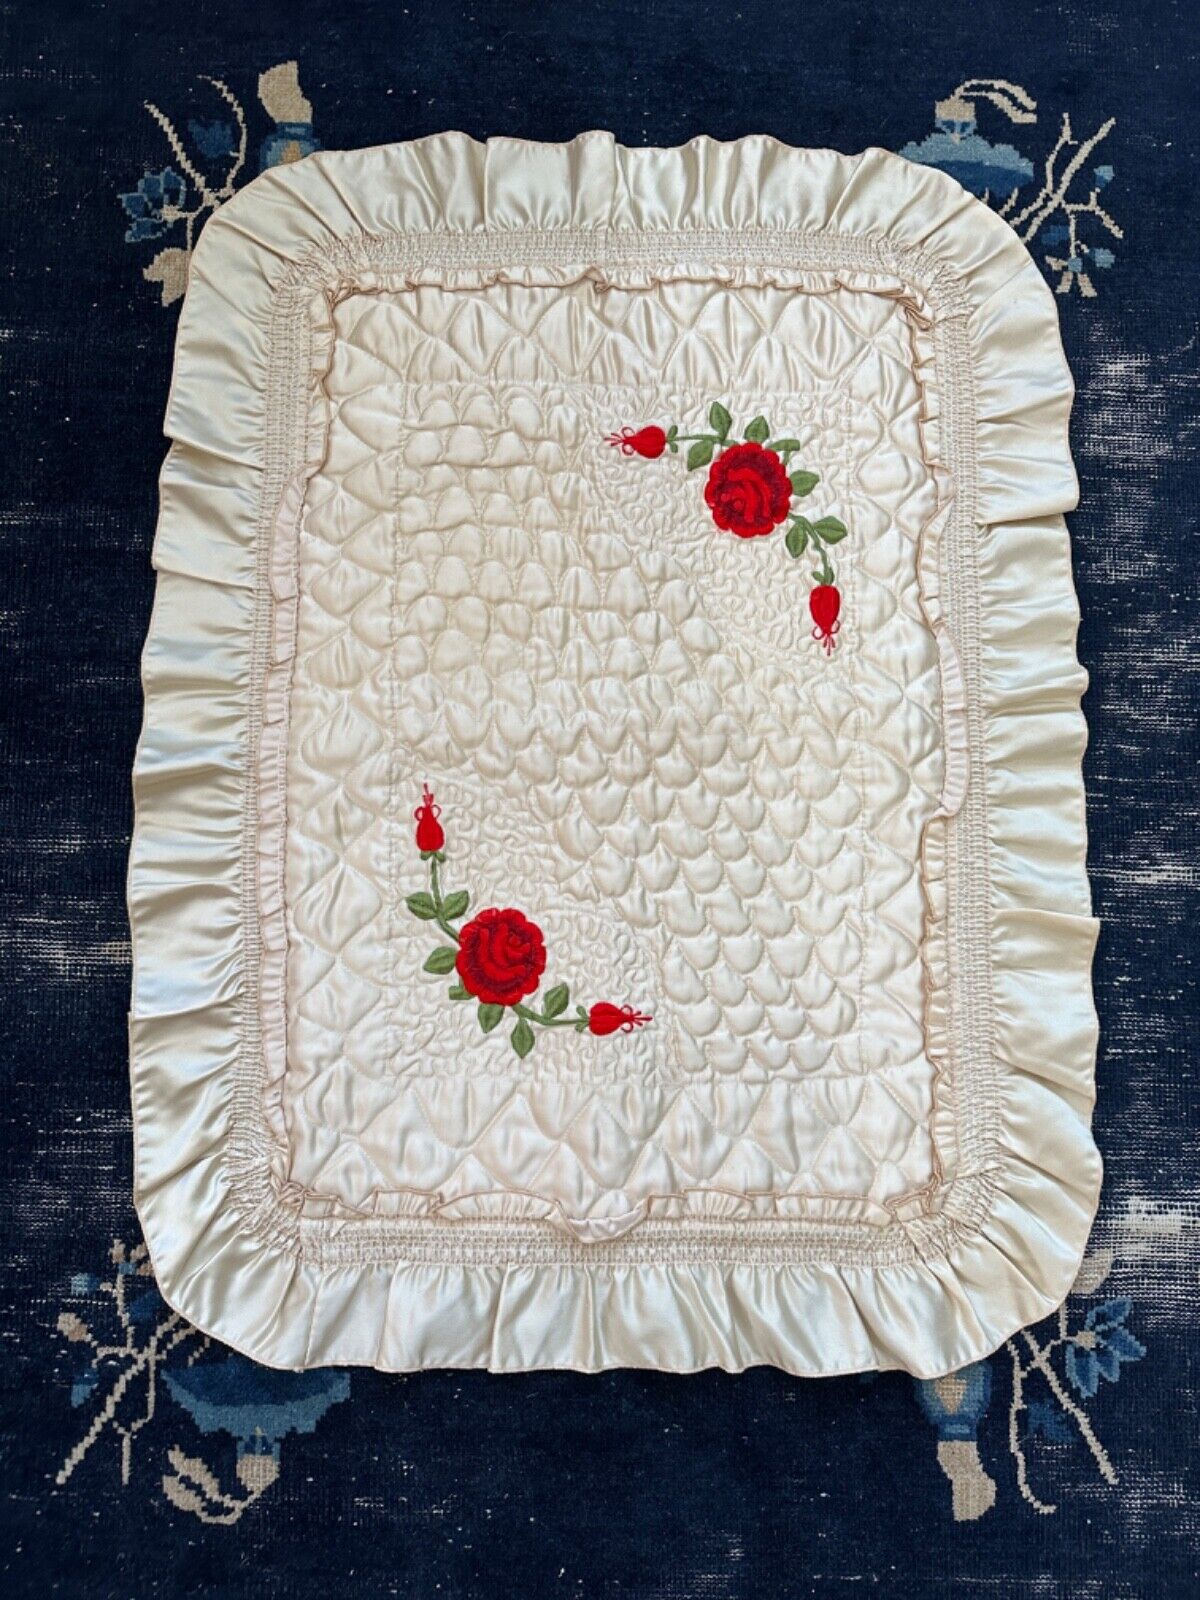 Two Vintage 1940s Quilted Satin Pillowcases w/ Embroidered Red Roses Boudoir